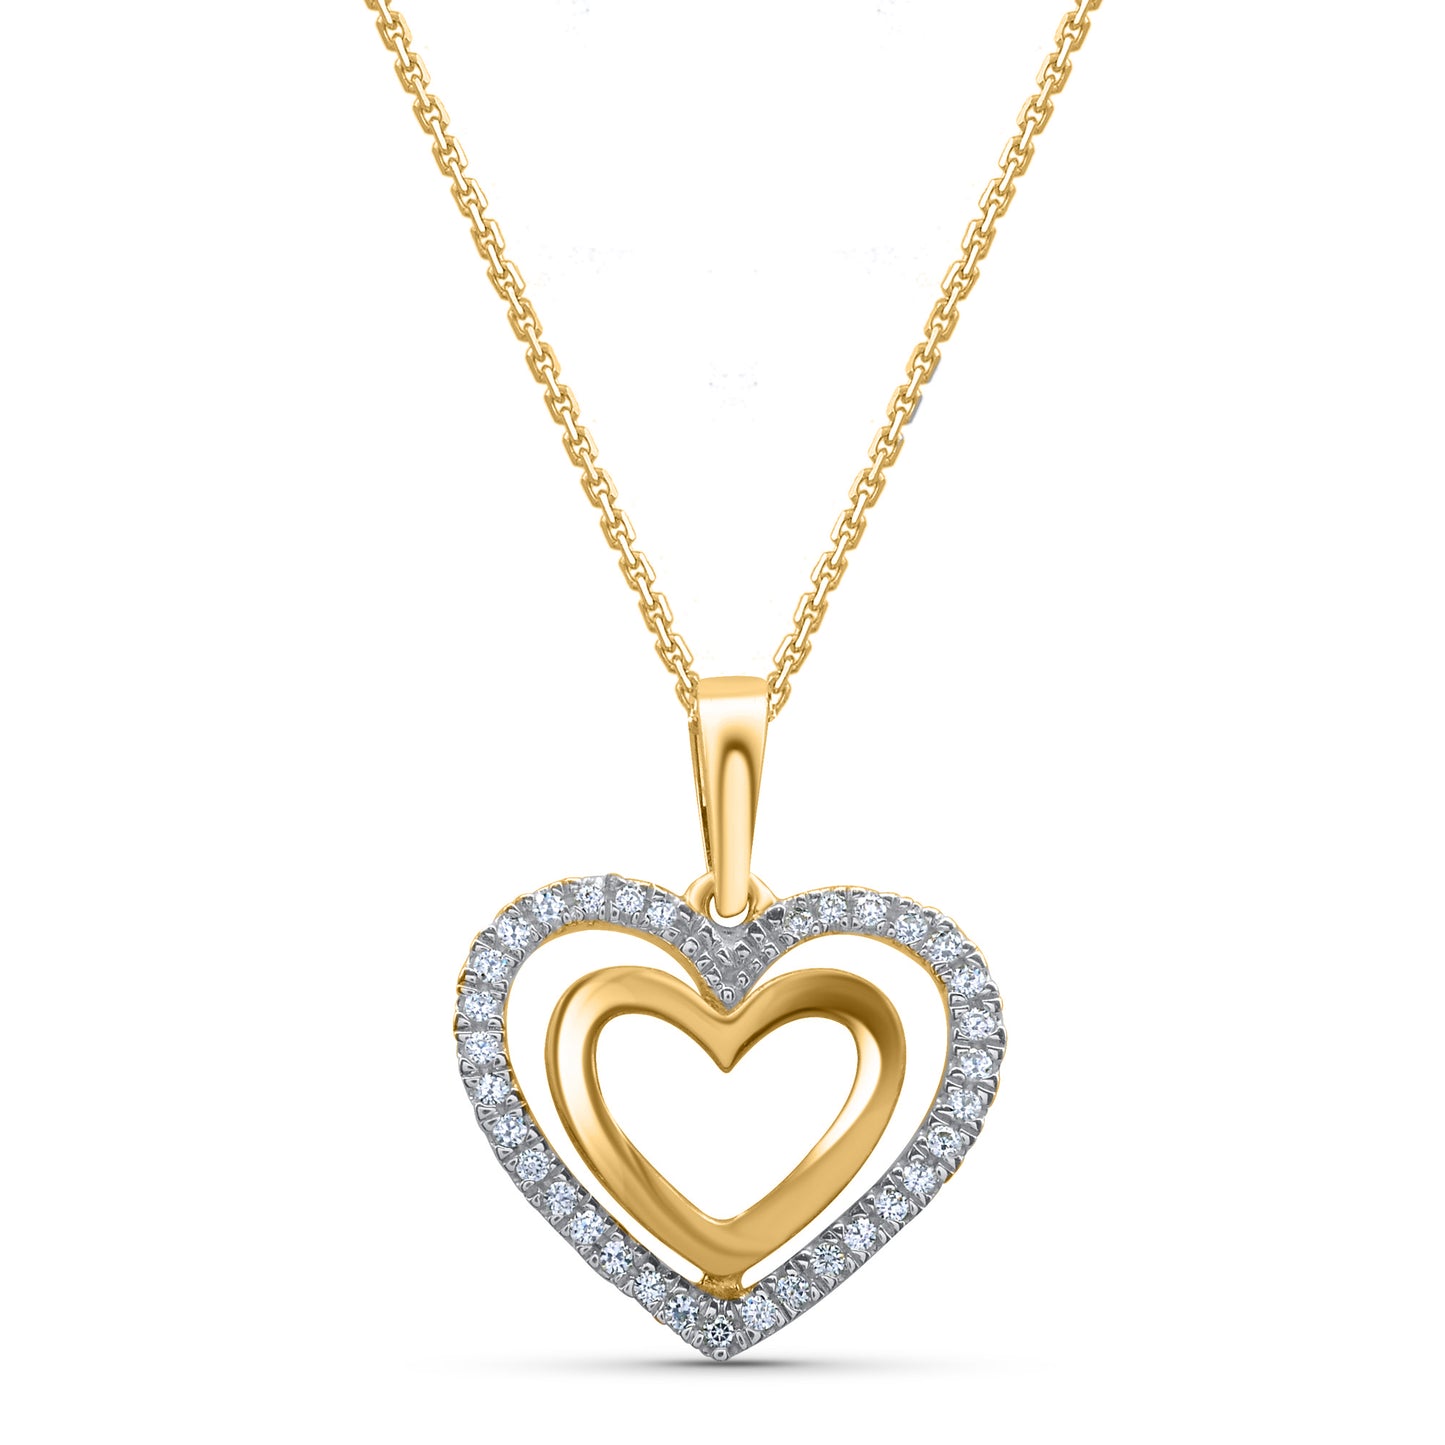 Double Heart Pendant Necklace in 10K Gold